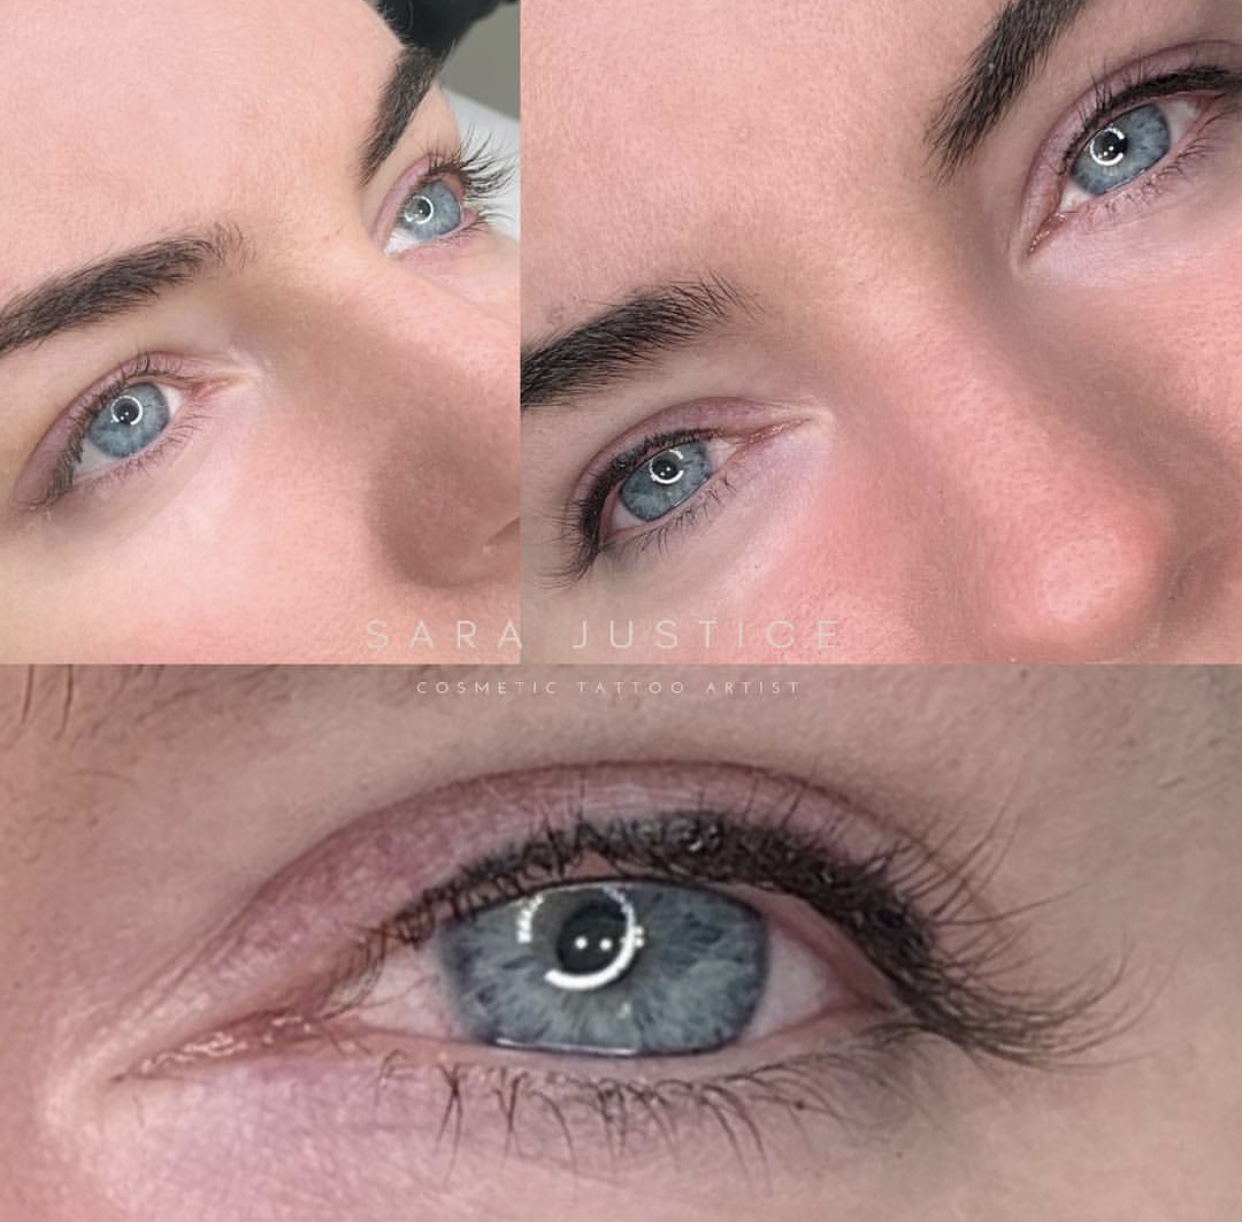 The Bella Brow  Natural lash enhancement  One of our favorite treatments  for absolutely any age  eye shapecolour  This natural eyeliner tattoo  is designed to make your lashes look